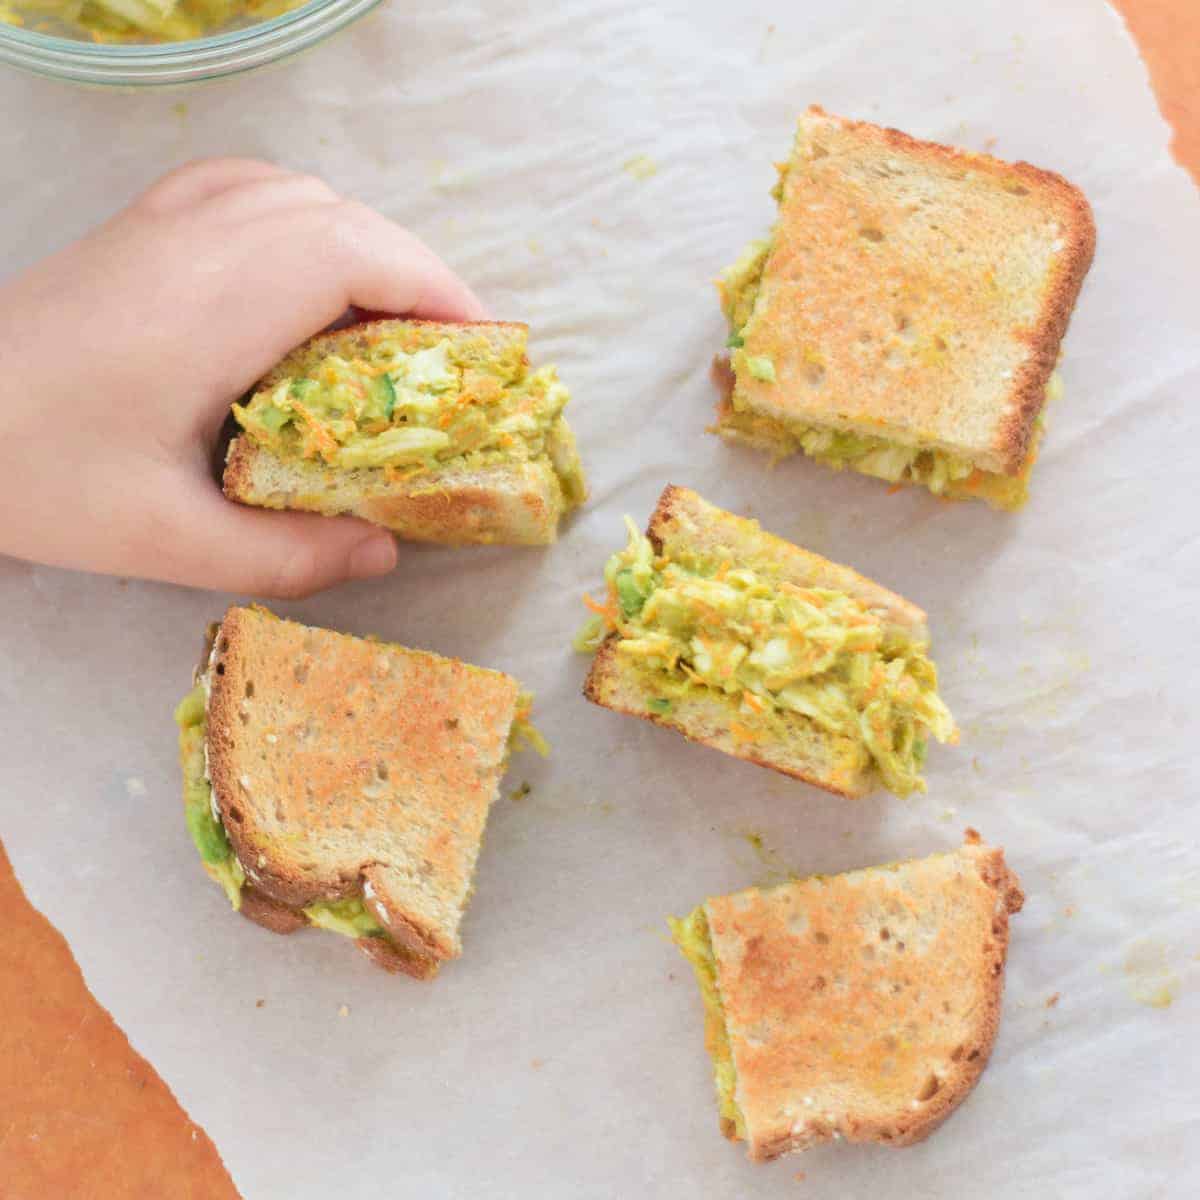 Curried chicken salad sandwiches - Simply Delicious